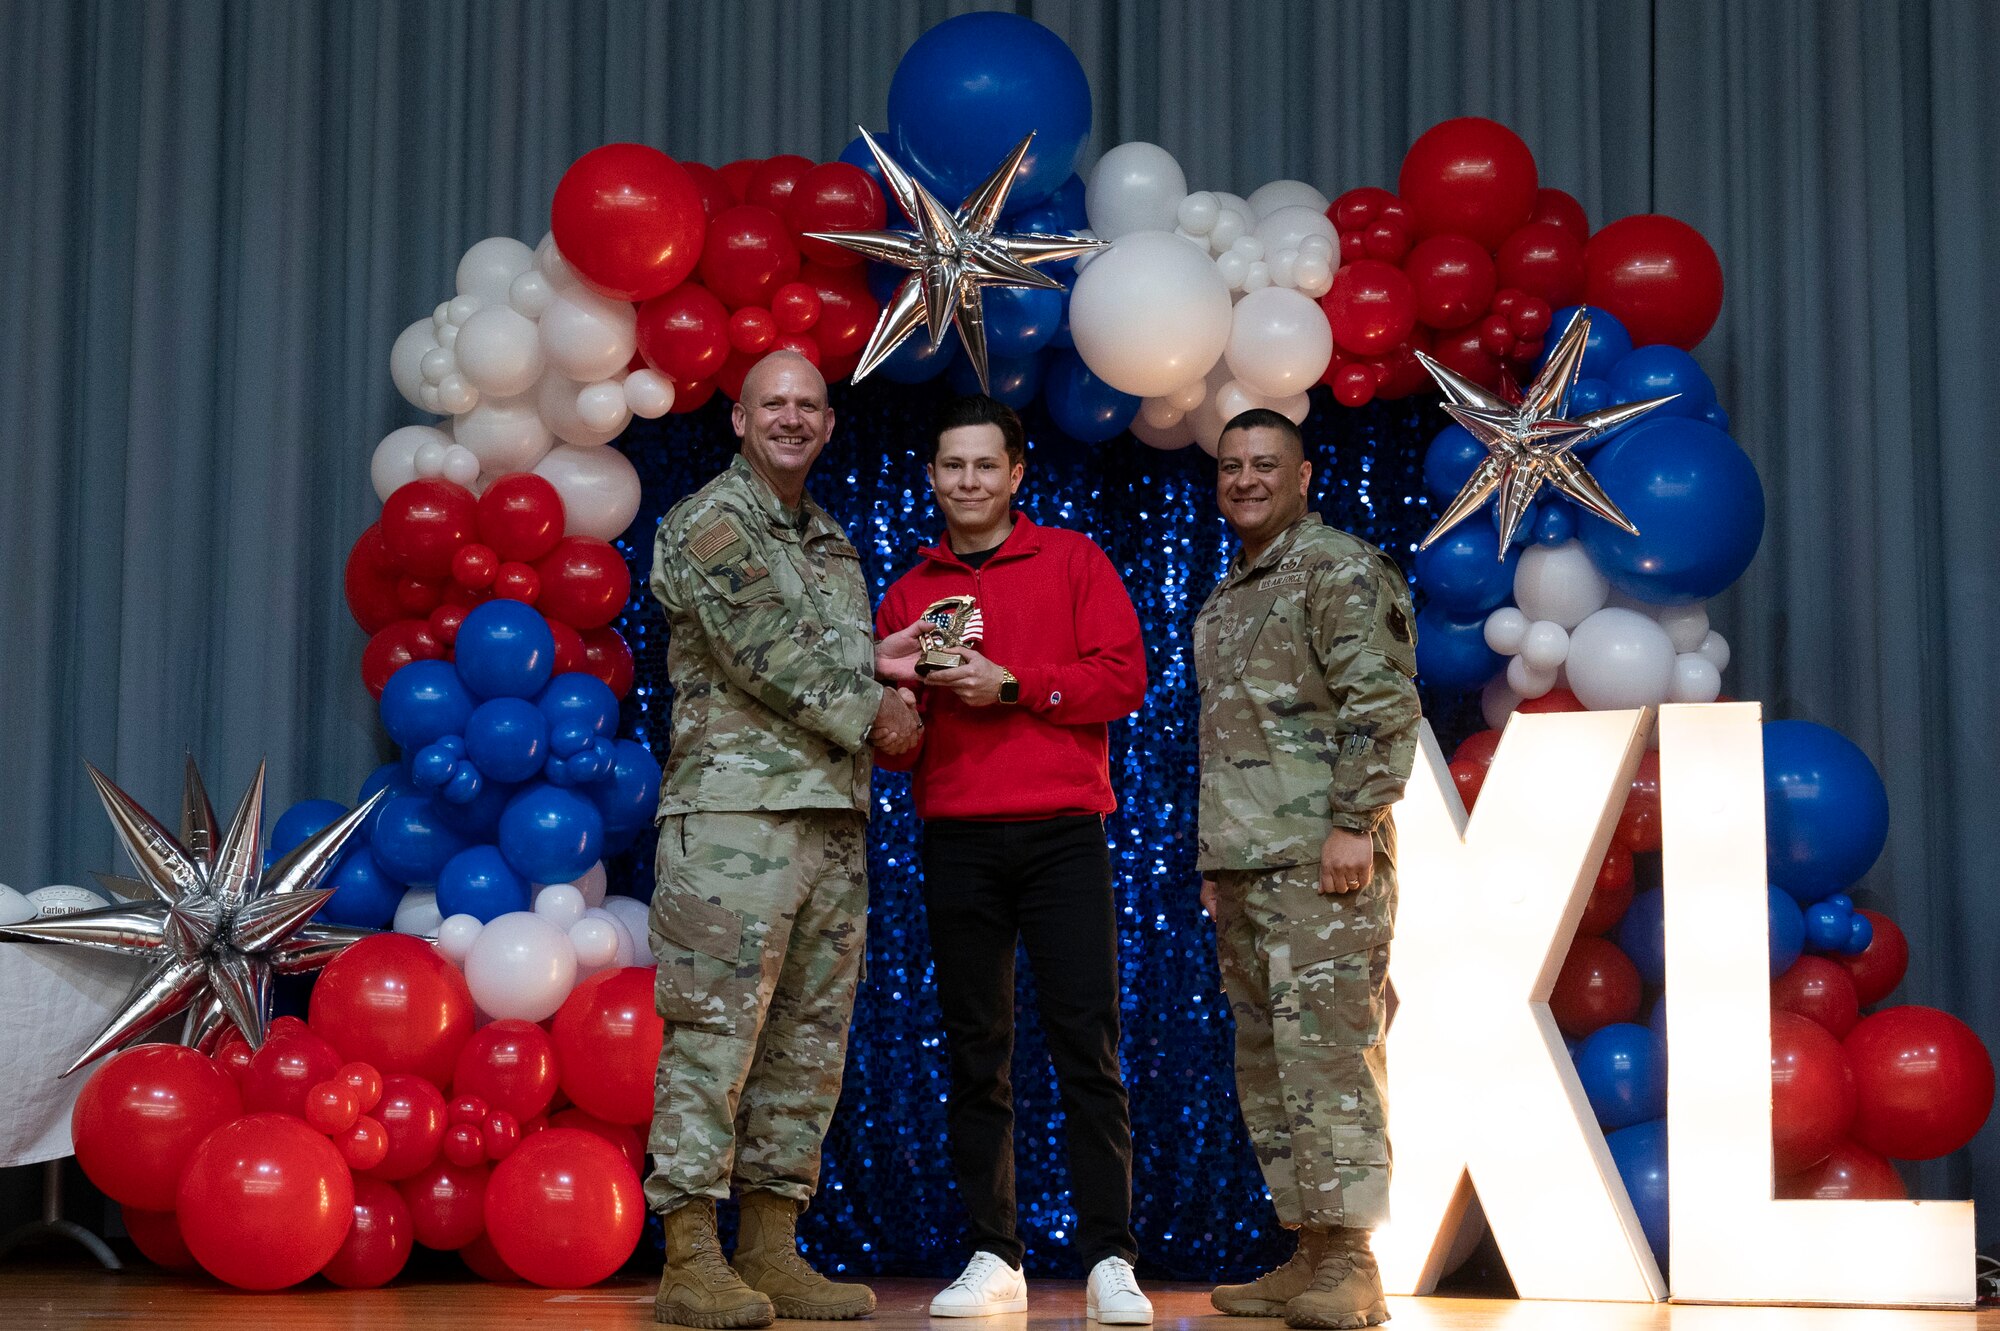 U.S. Air Force Col. Kevin Davidson, 47th Flying Training Wing (FTW) commander, and Chief Master Sgt. Lester Largaespada, 47th FTW command chief, present Jose Cervera, 47th Mission Support Group, an award during the 2023 47th FTW Annual Awards Ceremony at Laughlin Air Force Base, Texas, Feb. 2, 2024. Annual award winners were selected based on their technical expertise, demonstration of leadership and job performance. (U.S. Air Force photo by Senior Airman Kailee Reynolds)